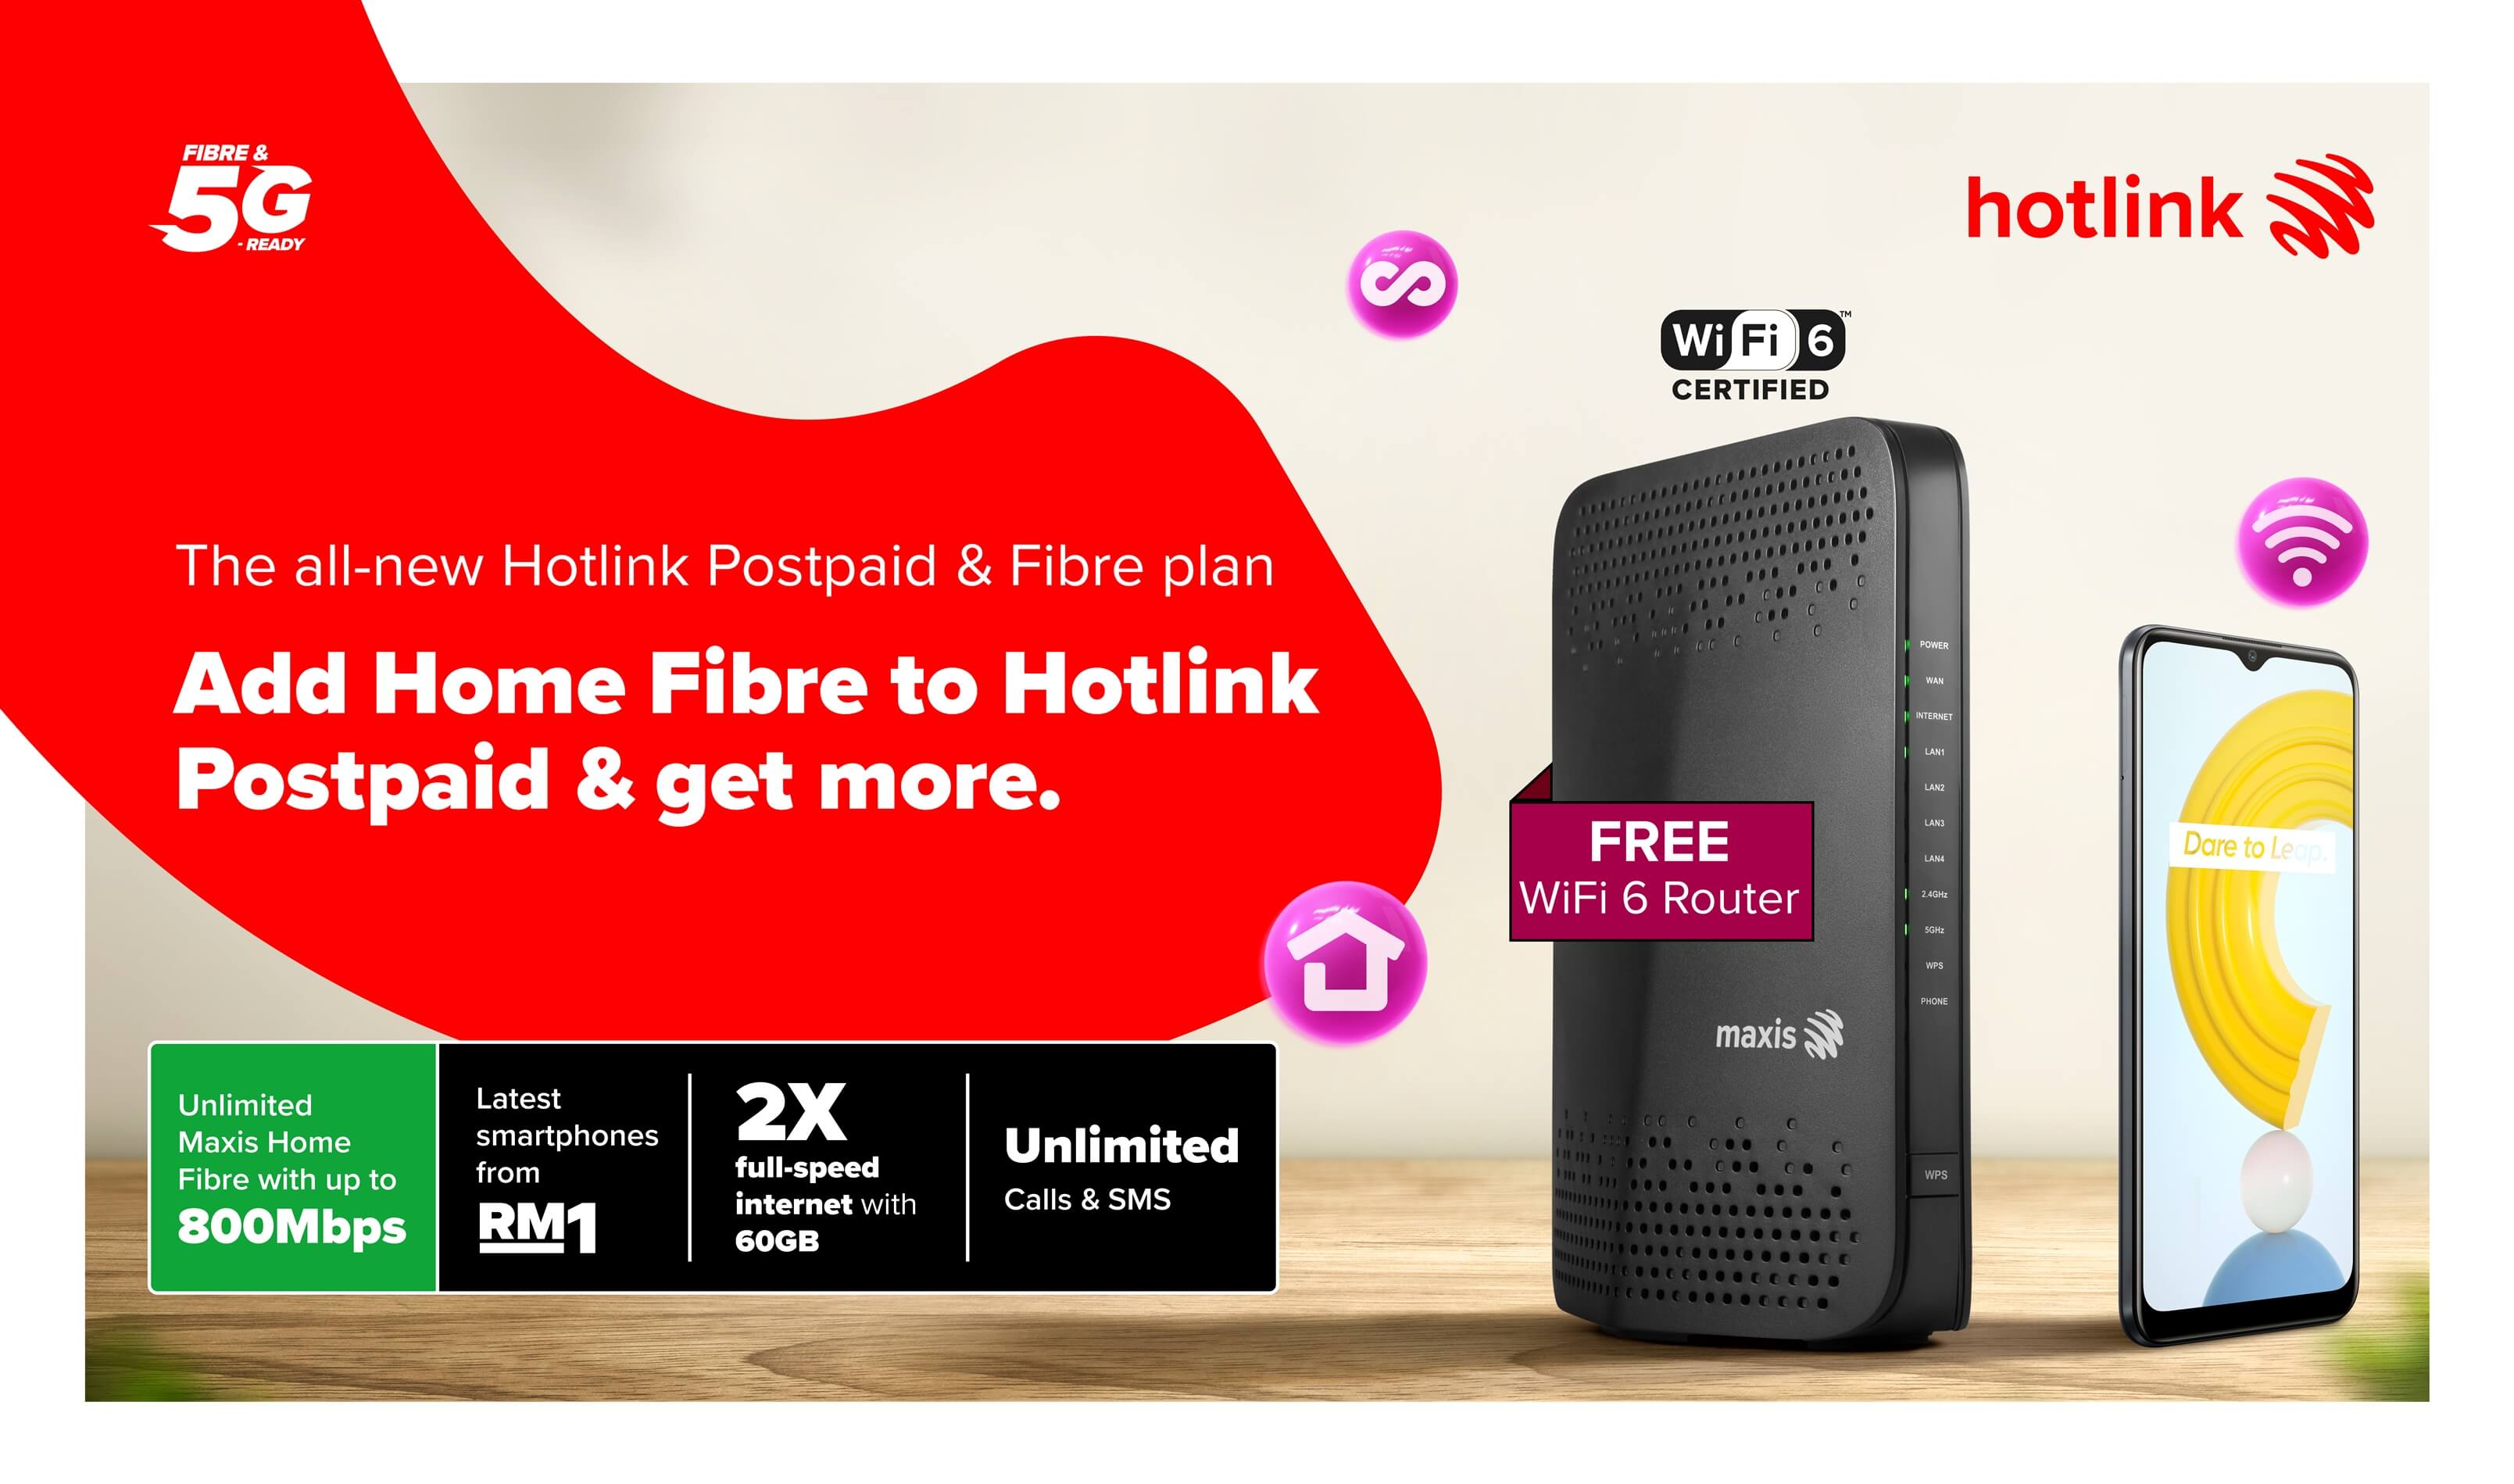 Maxis introduces Hotlink Postpaid, Fibre to Malaysians